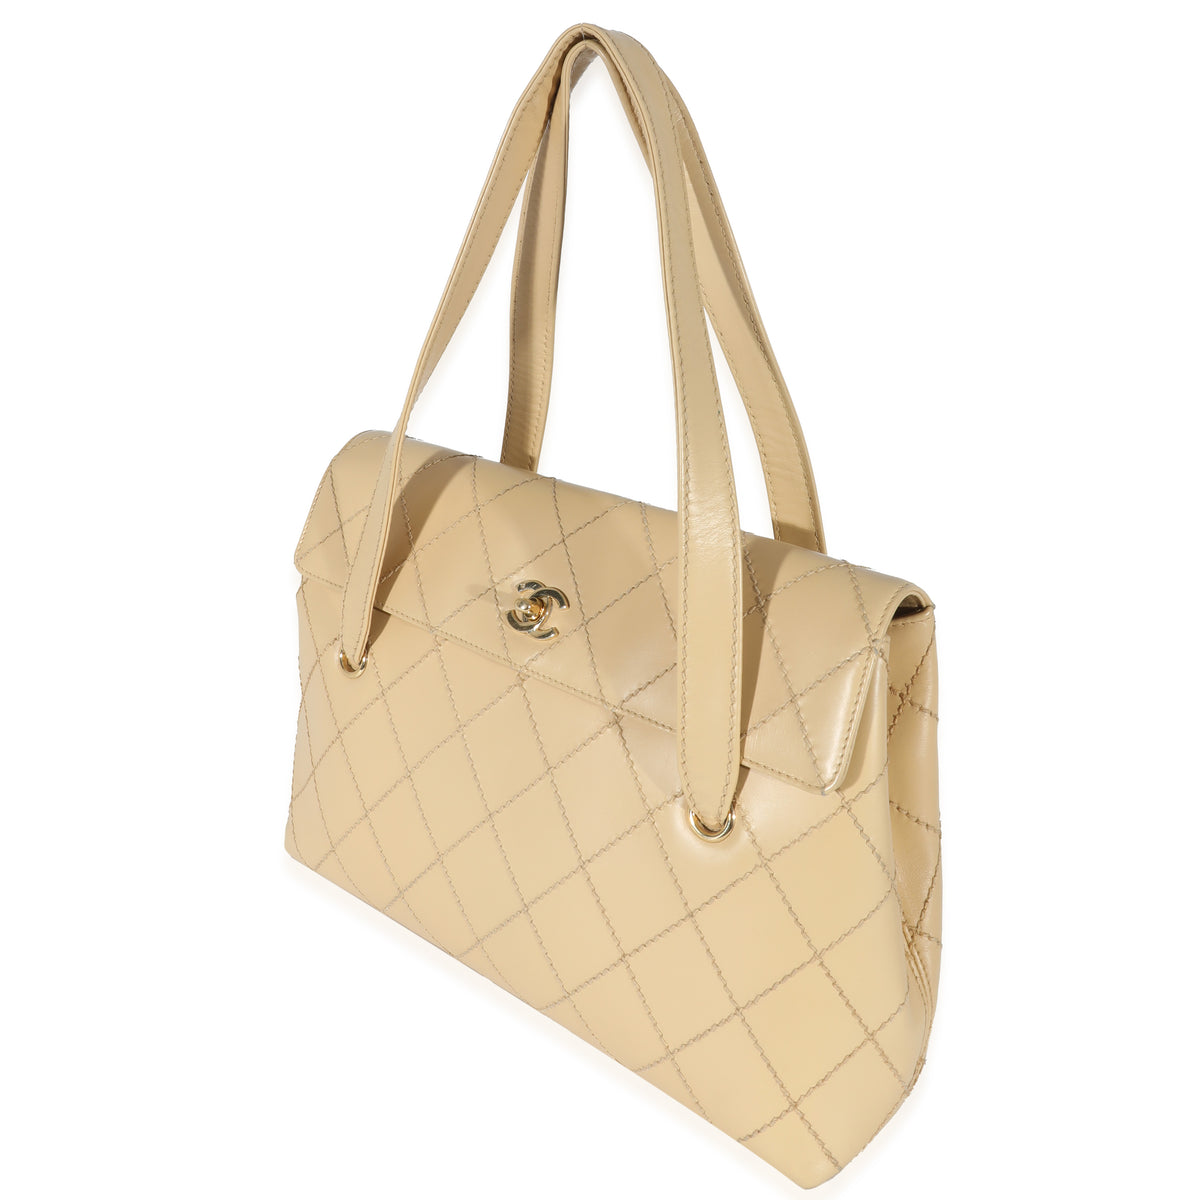 Chanel Vintage Beige Lambskin Whipstitch Quilted Tote